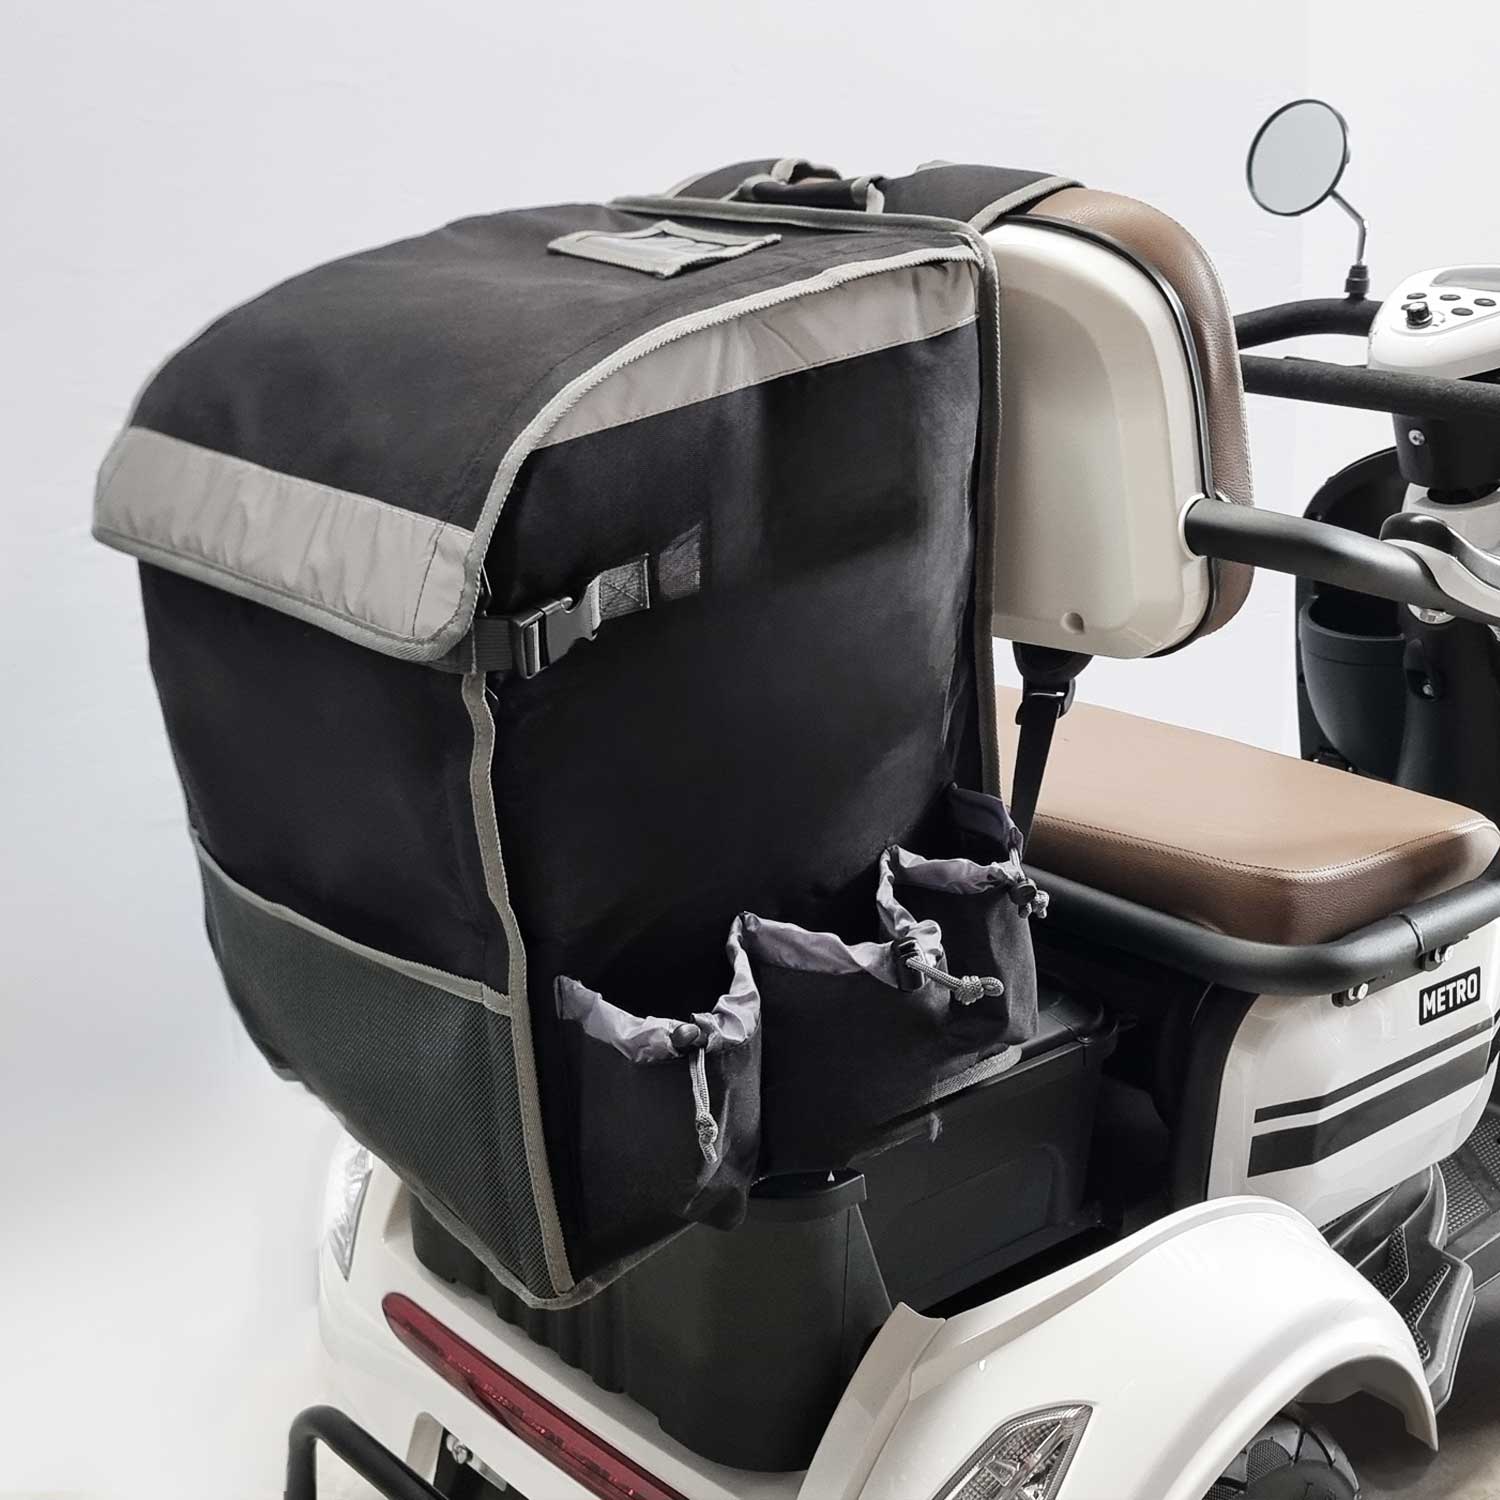 LargeBag-MobilityScooter-1a.jpg